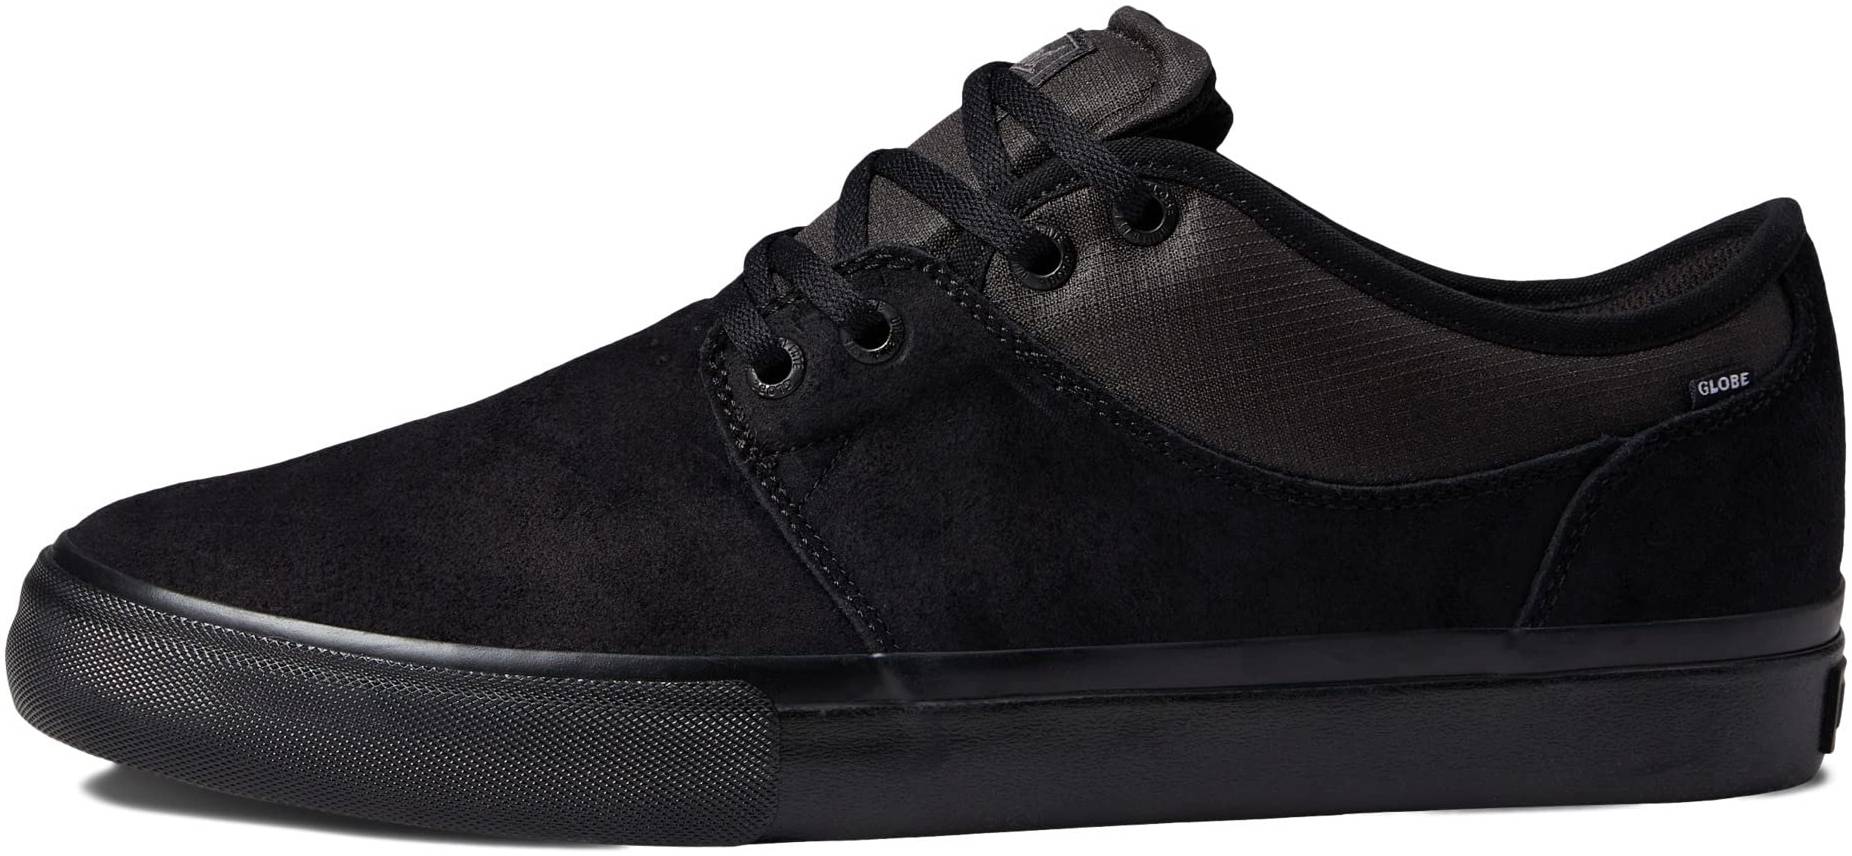 Globe Mahalo Plus GBMAHALOP Mens Black Suede Skate Inspired Sneakers Shoes 